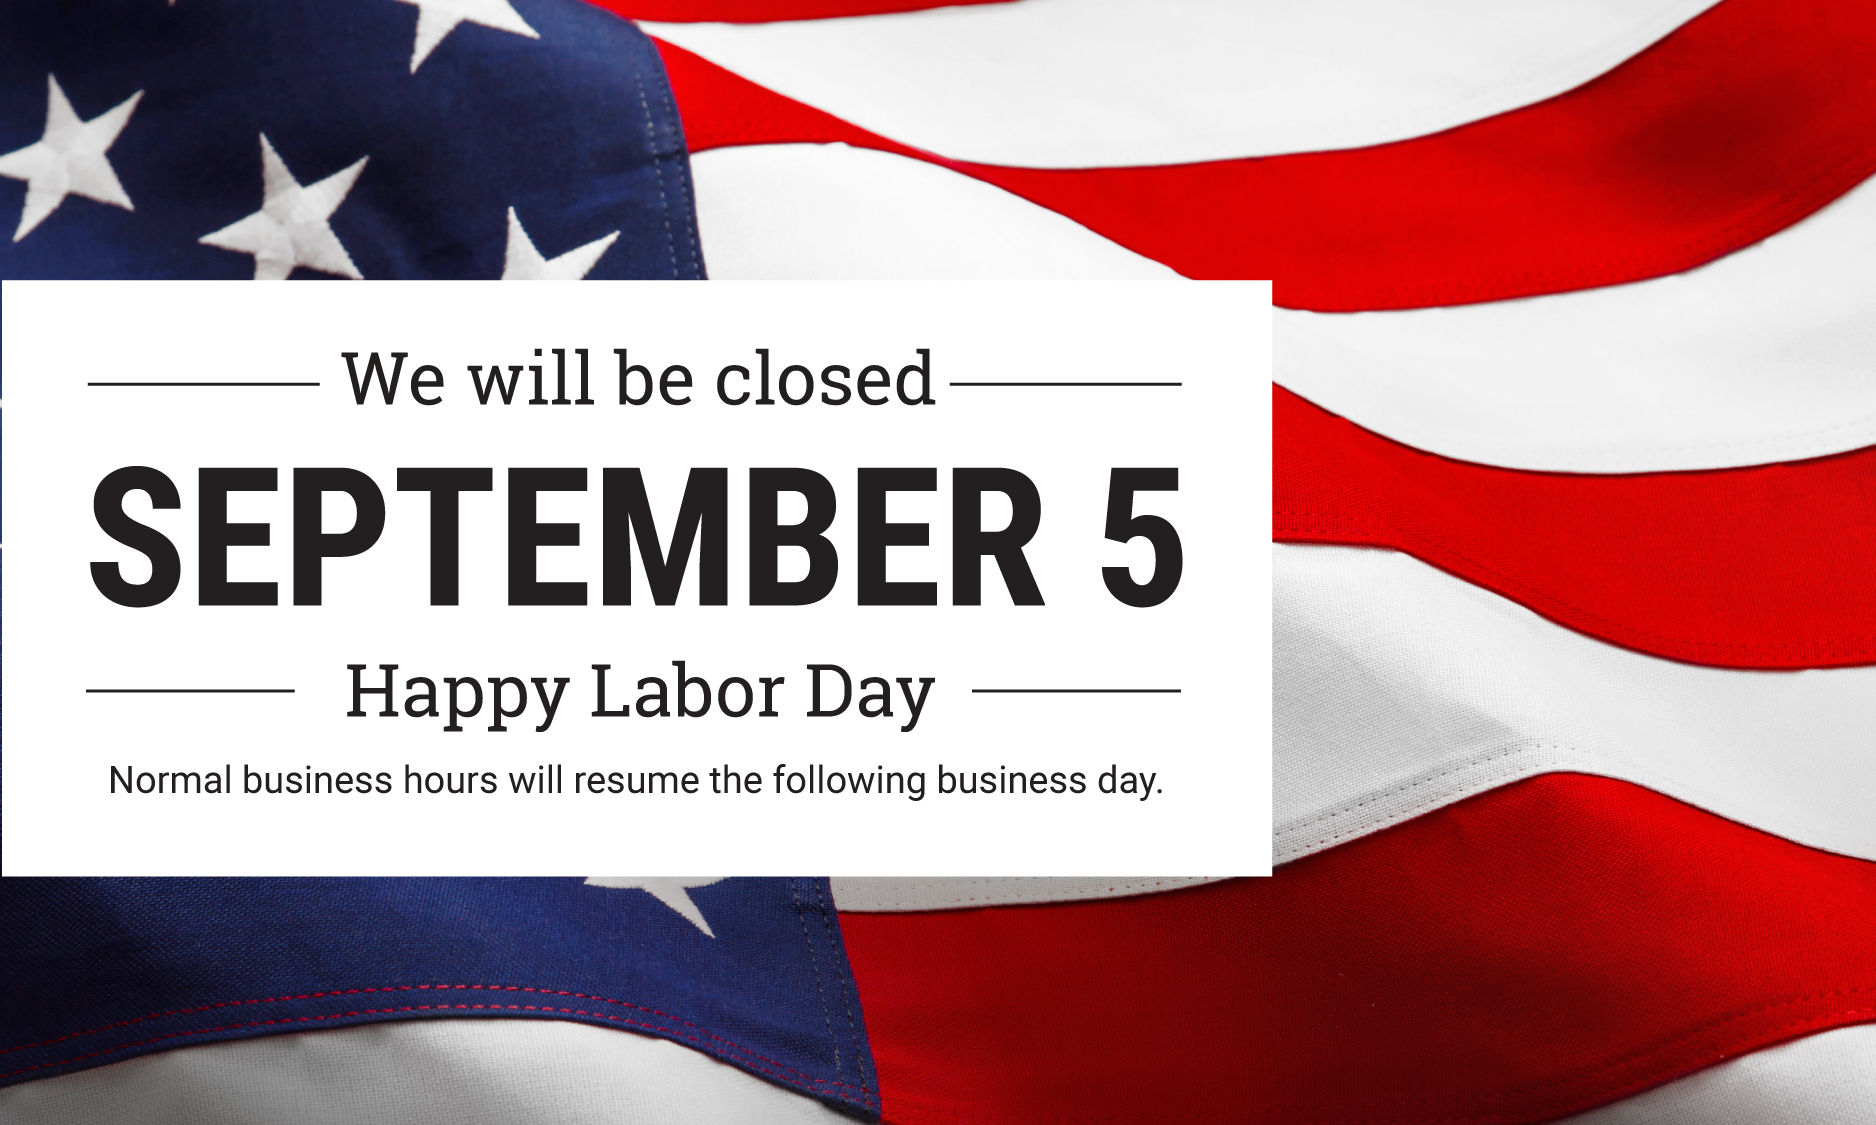 acms-offices-will-be-closed-sept-5th-2022-in-observance-of-labor-day